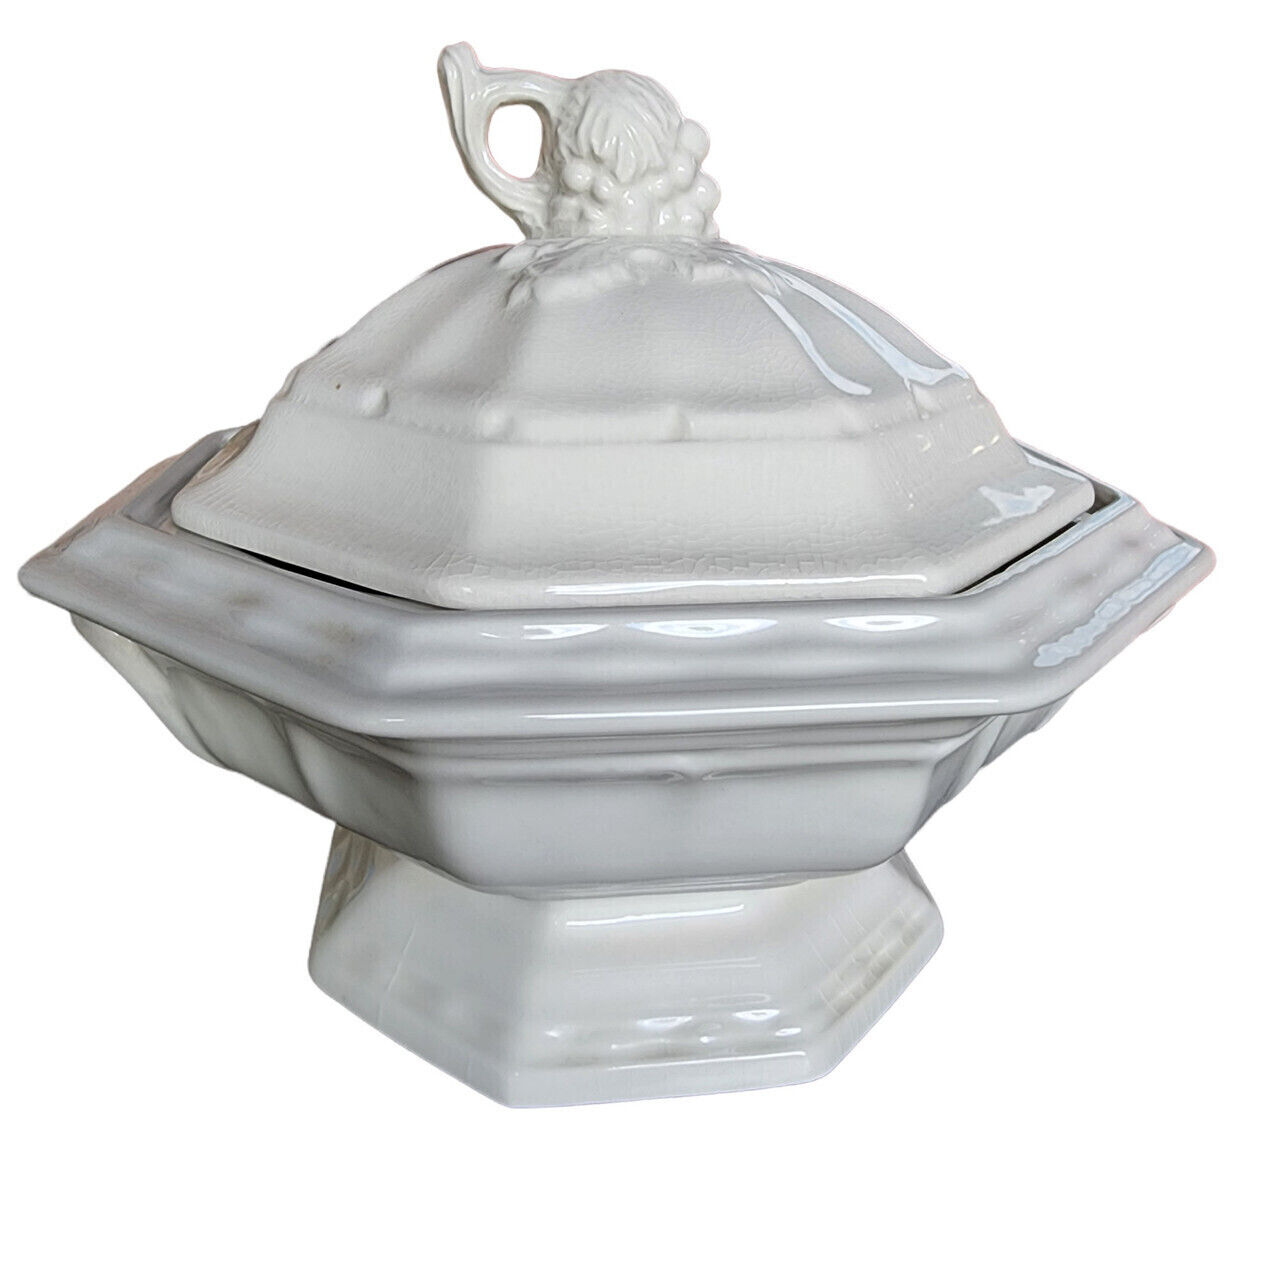 RED CLIFF Grape Ironstone Octagonal Covered Vegetable Tureen